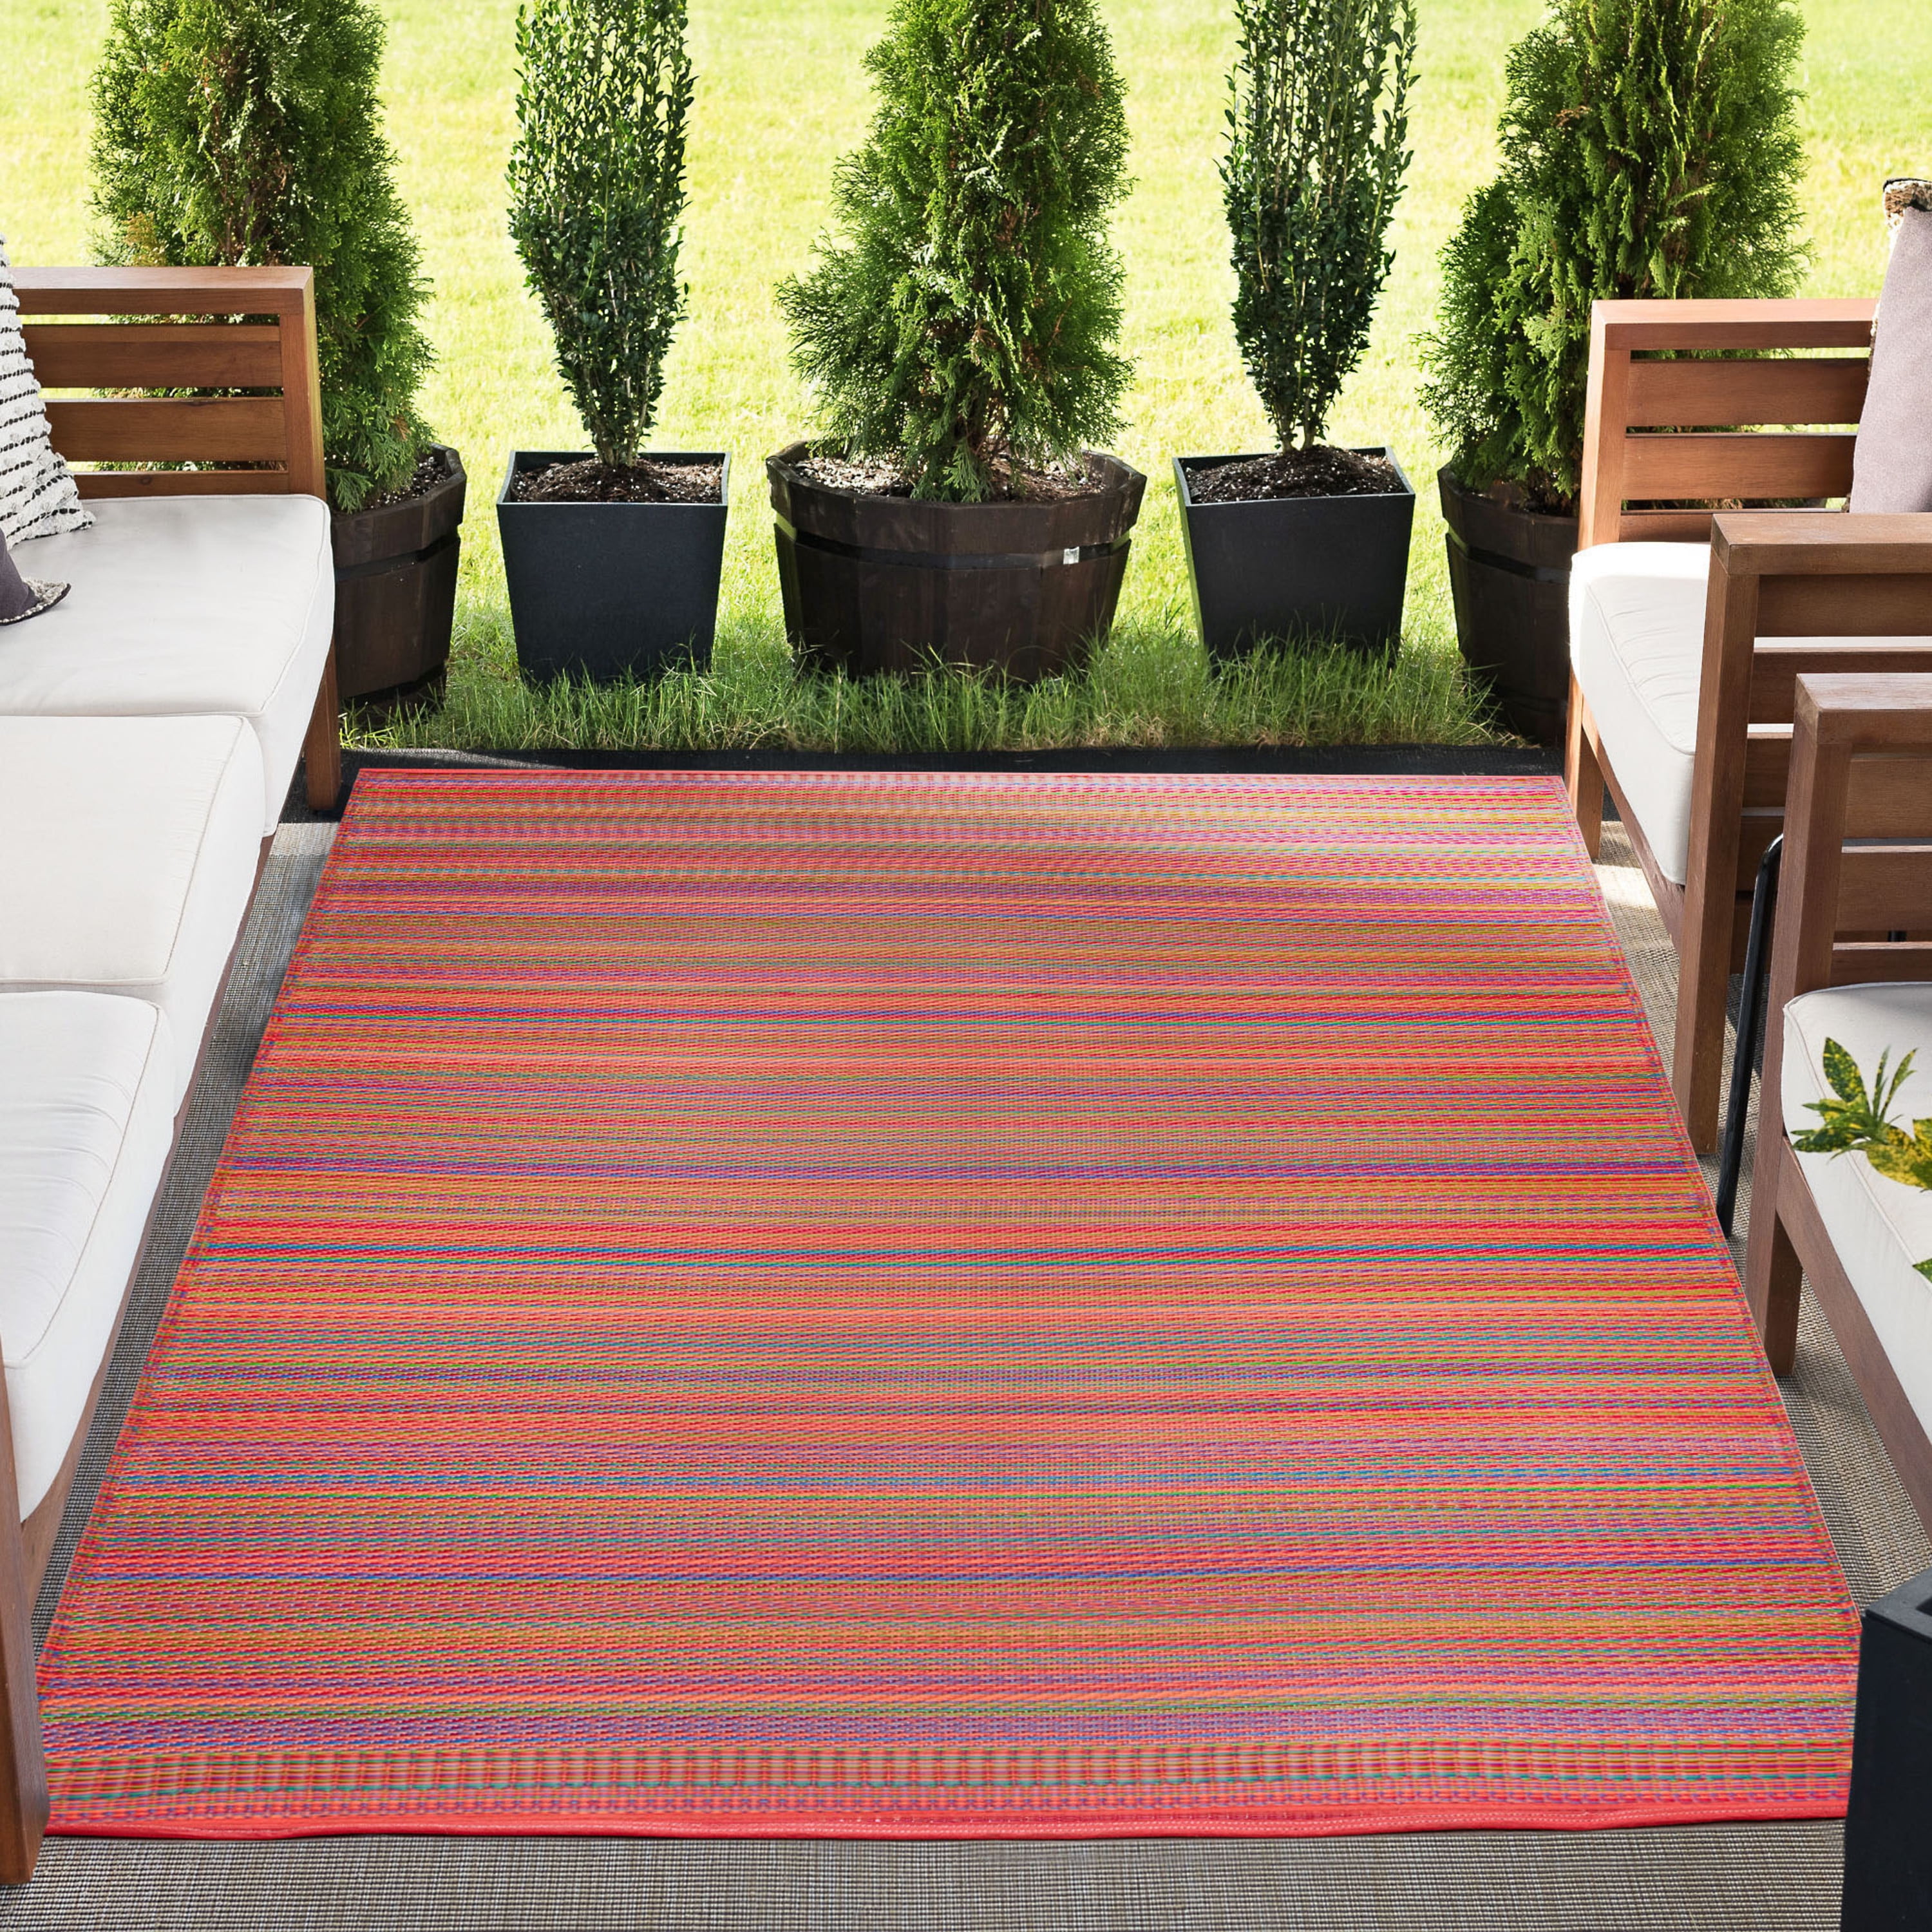 5x7 Waterproof, Reversible Plastic Straw Outdoor Rugs for Patios, Also for  Camping, RV, Deck, Porch, Balcony, Camp, Patio, Red, Stripe